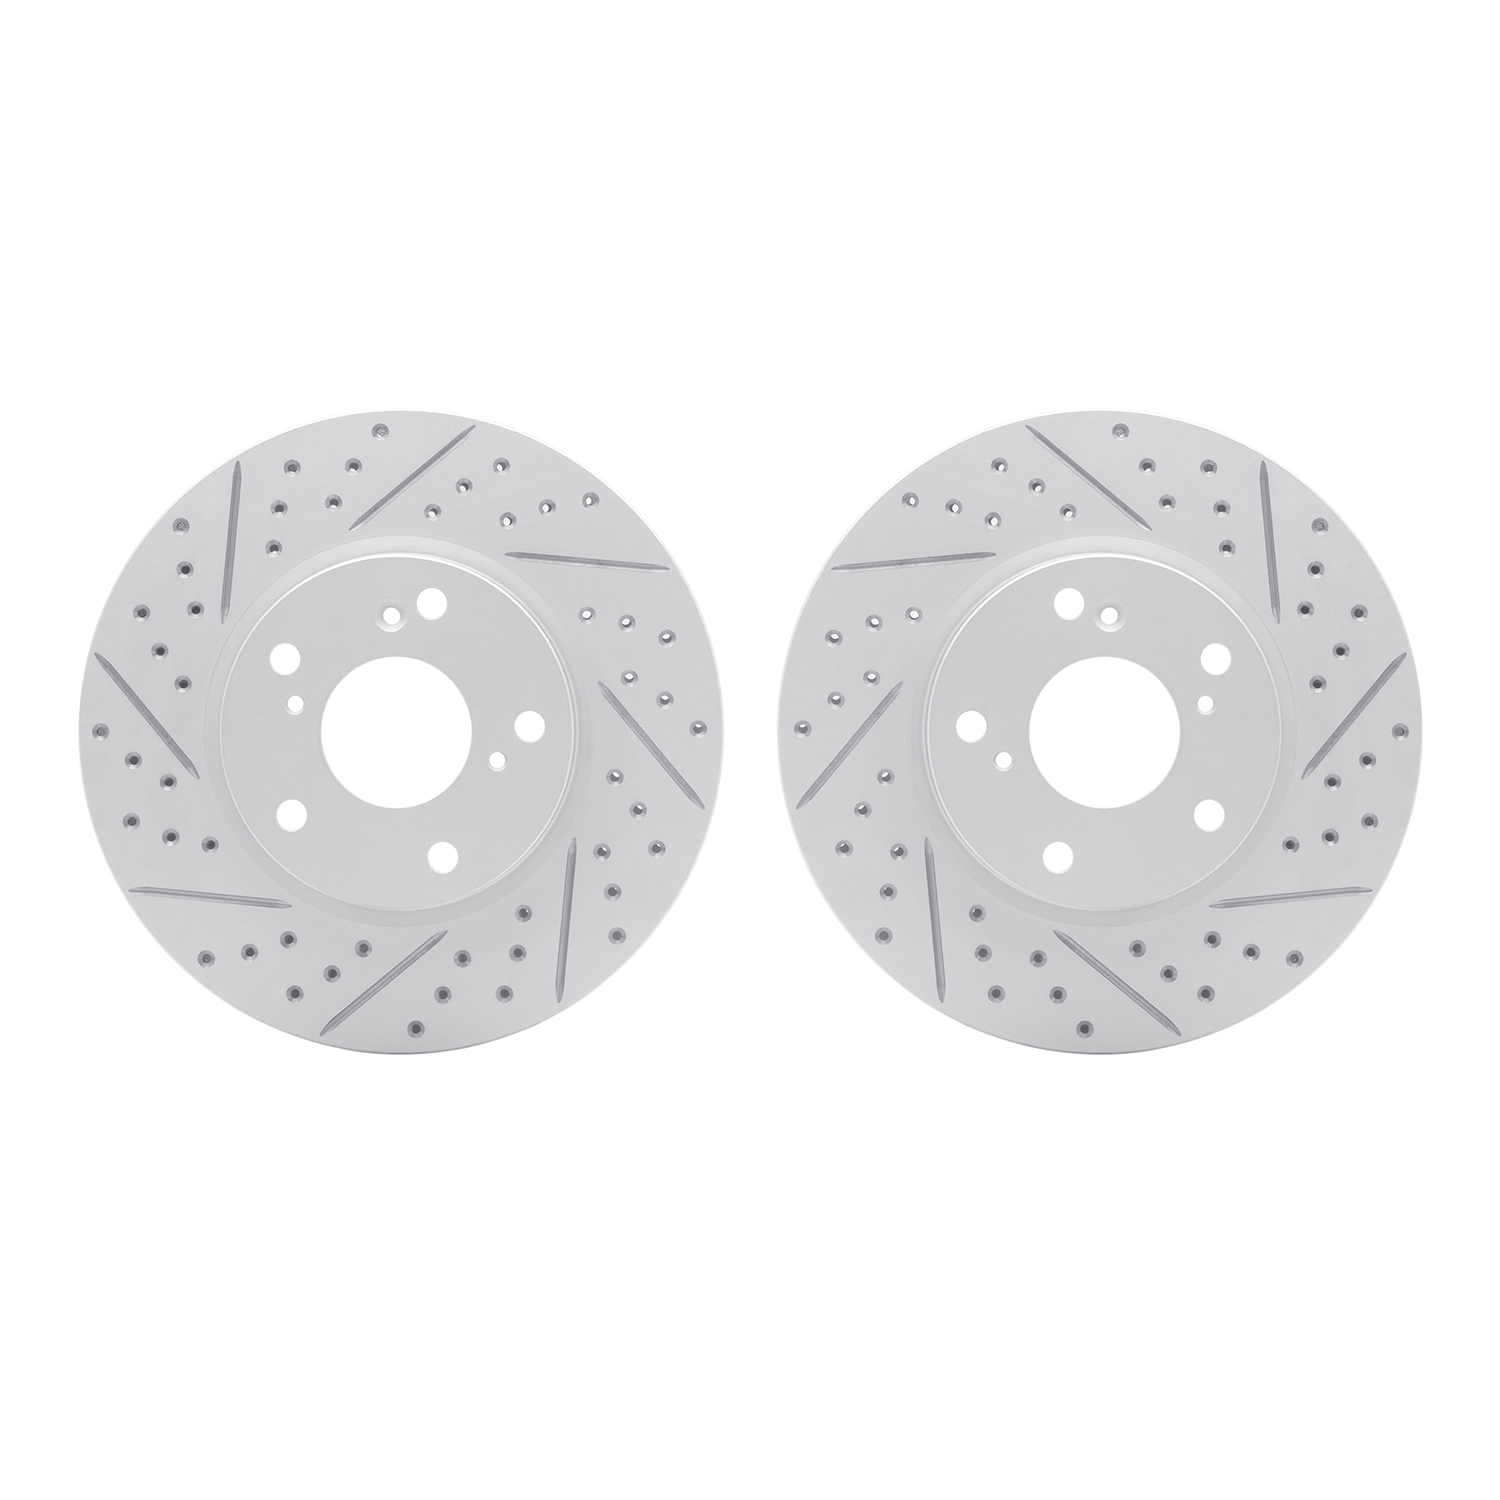 2002-59018 Geoperformance Drilled/Slotted Brake Rotors, Fits Select Acura/Honda, Position: Front